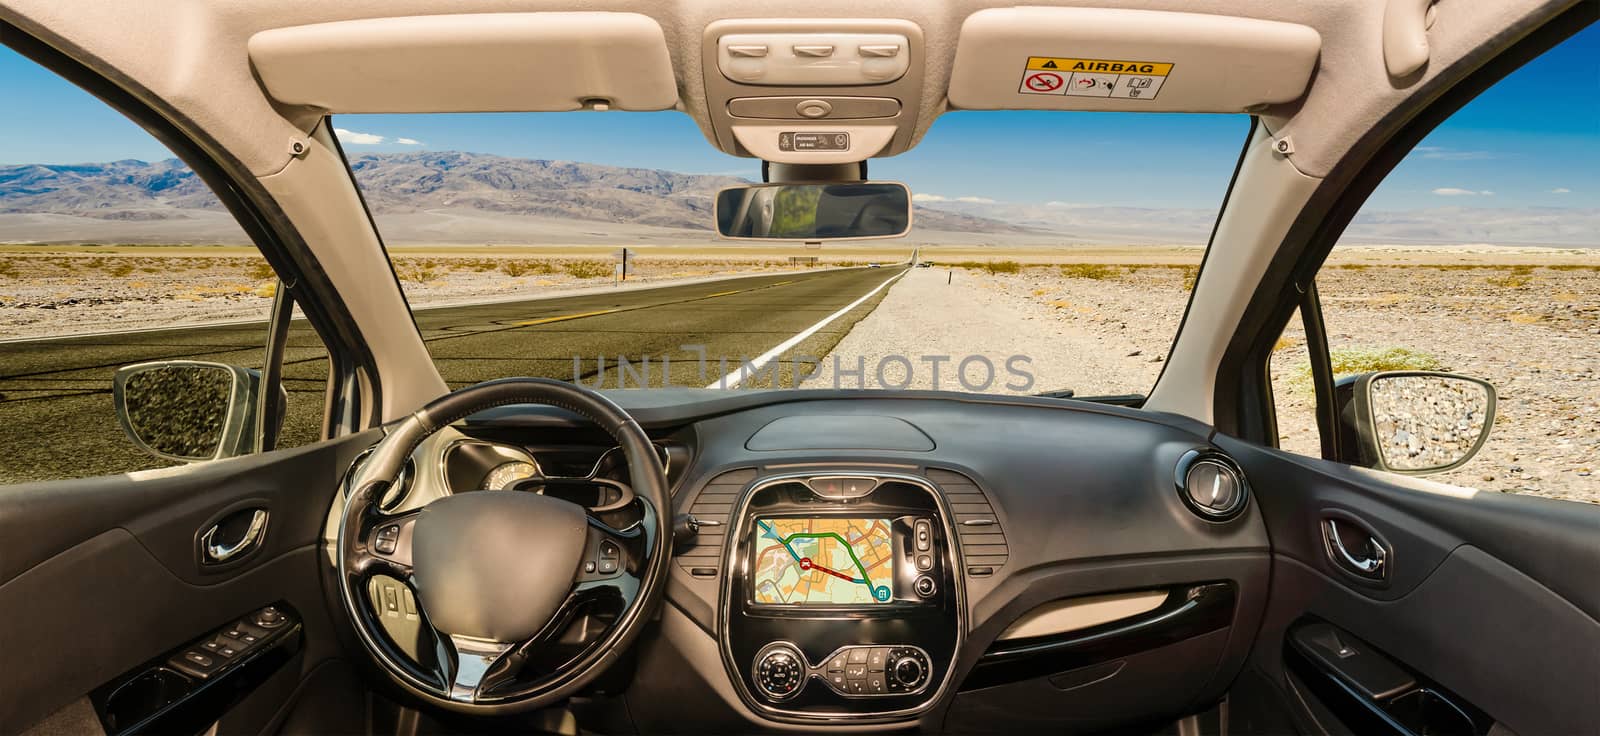 Car windshield with view of desert road, Death Valley, USA by marcorubino